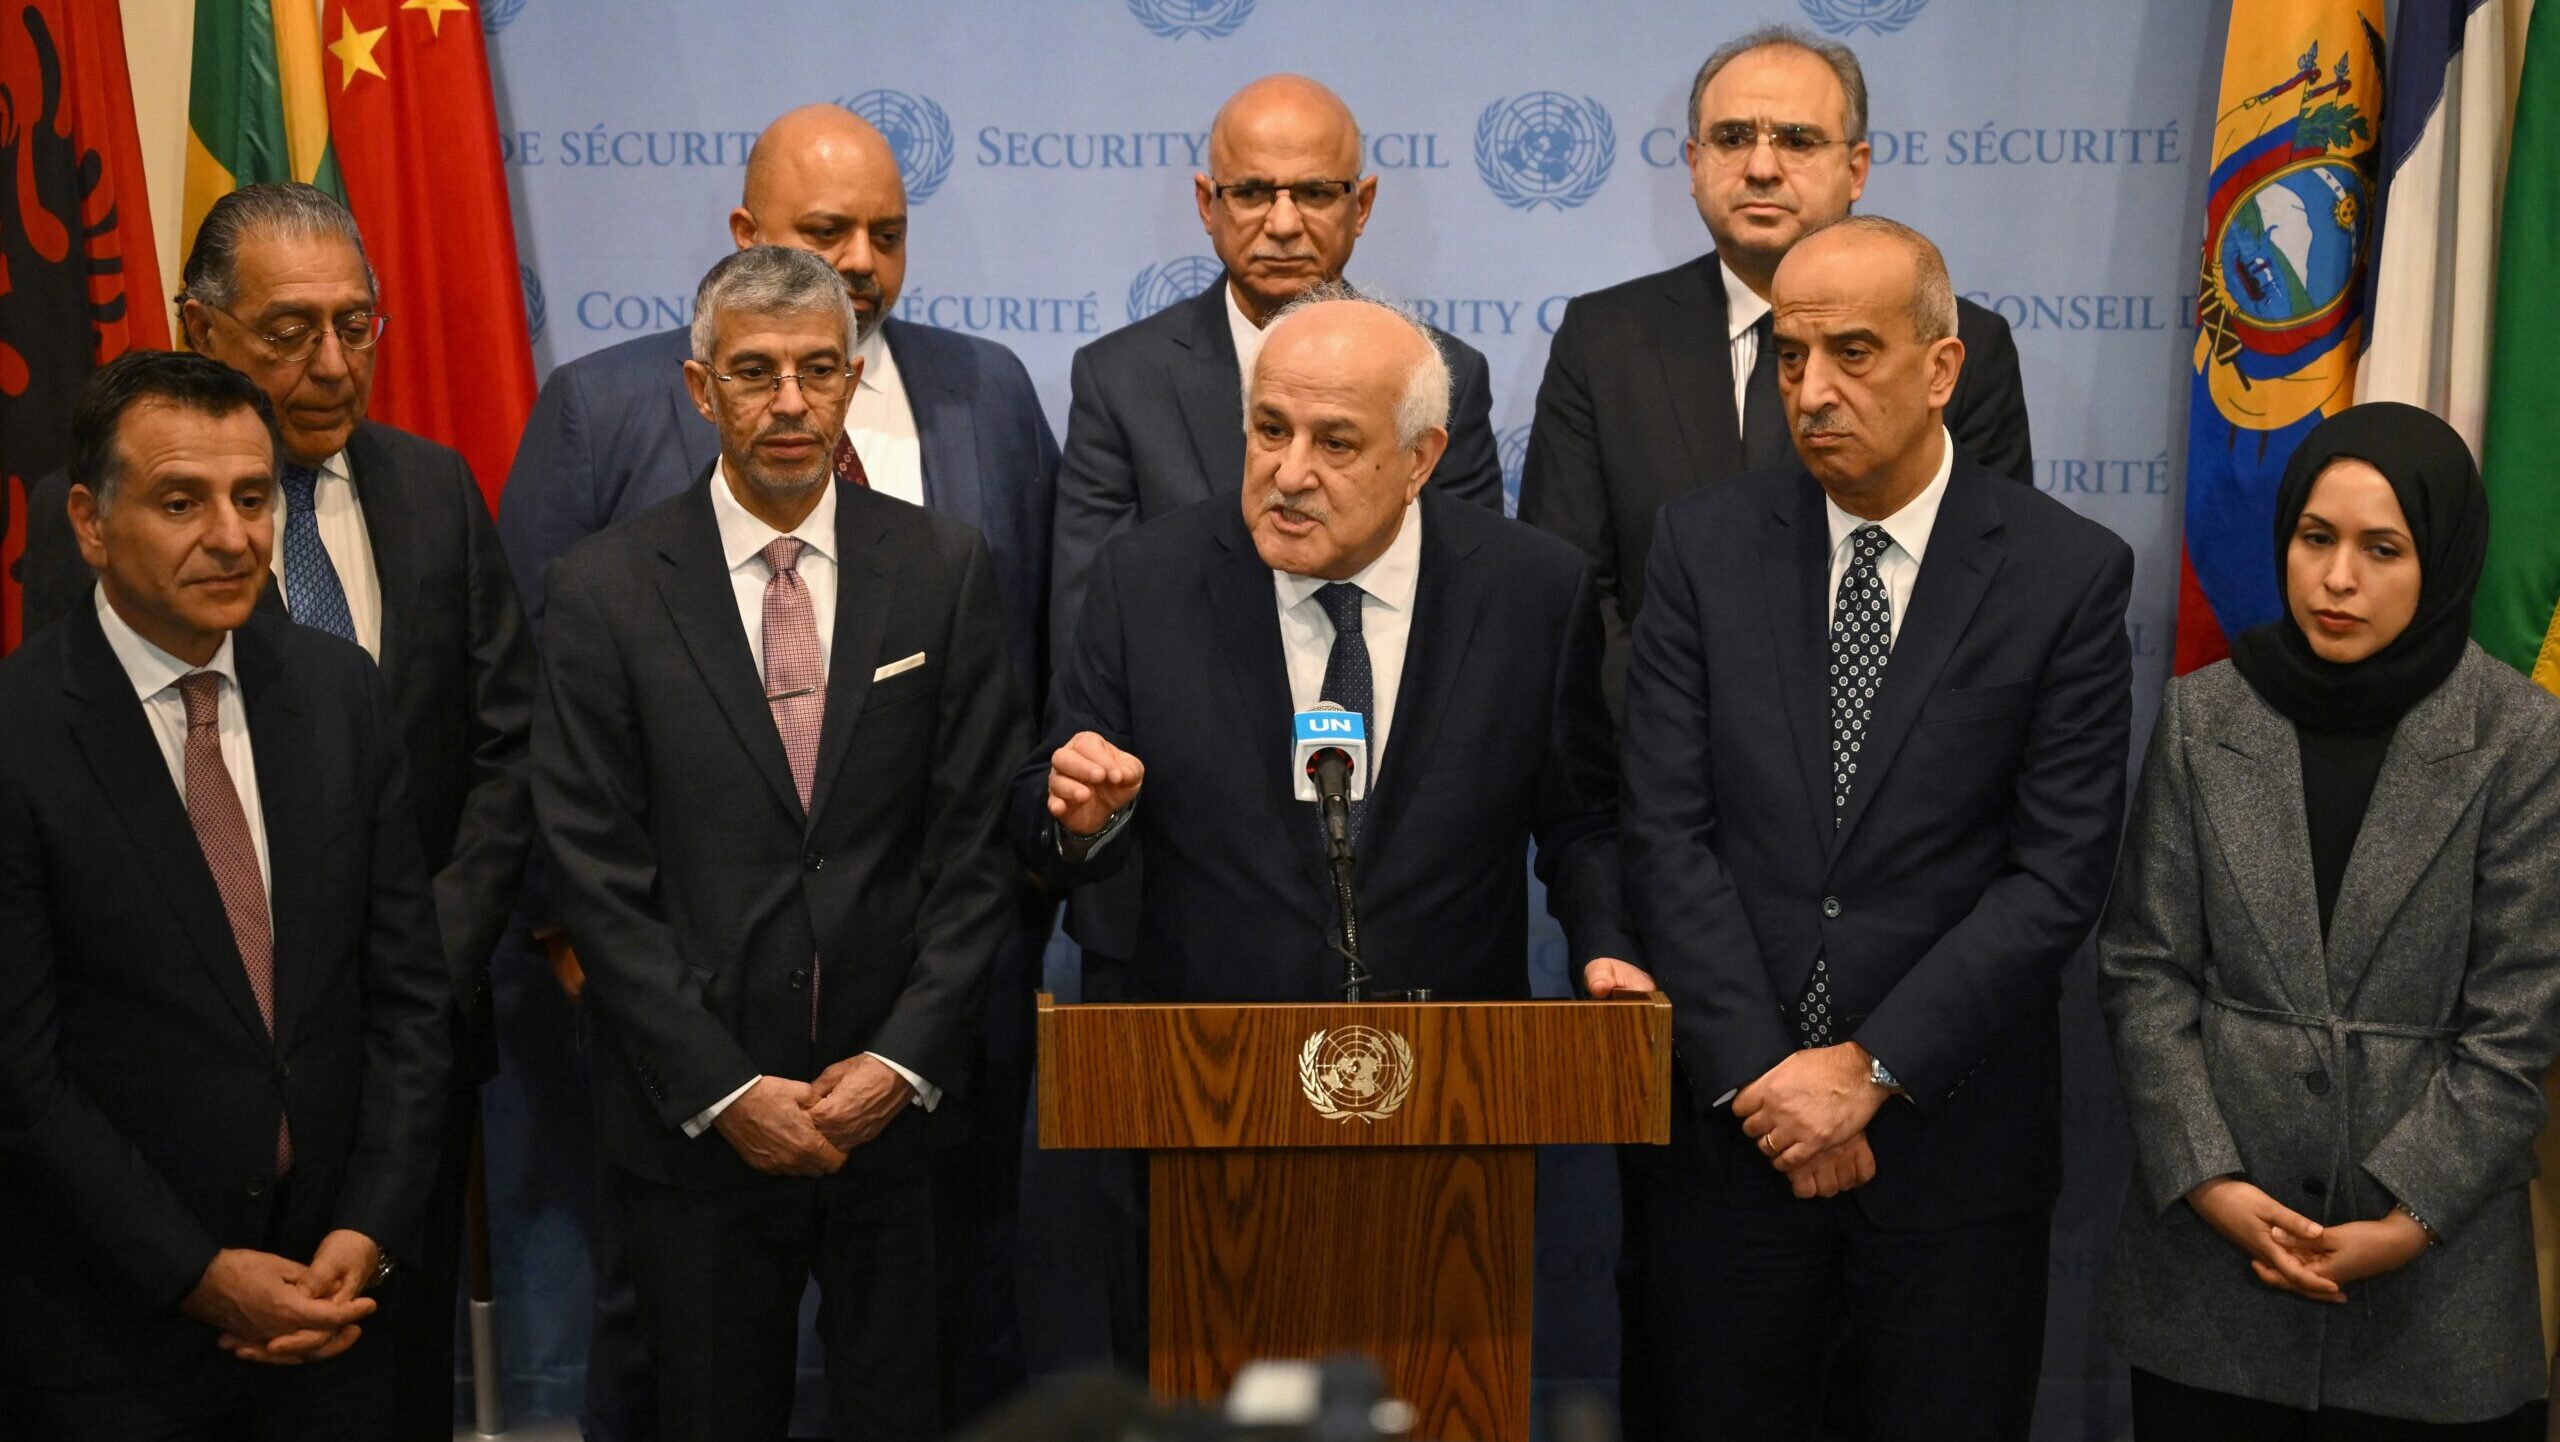 UN General Assembly Adopts Resolution Urging Cease-Fire in Gaza